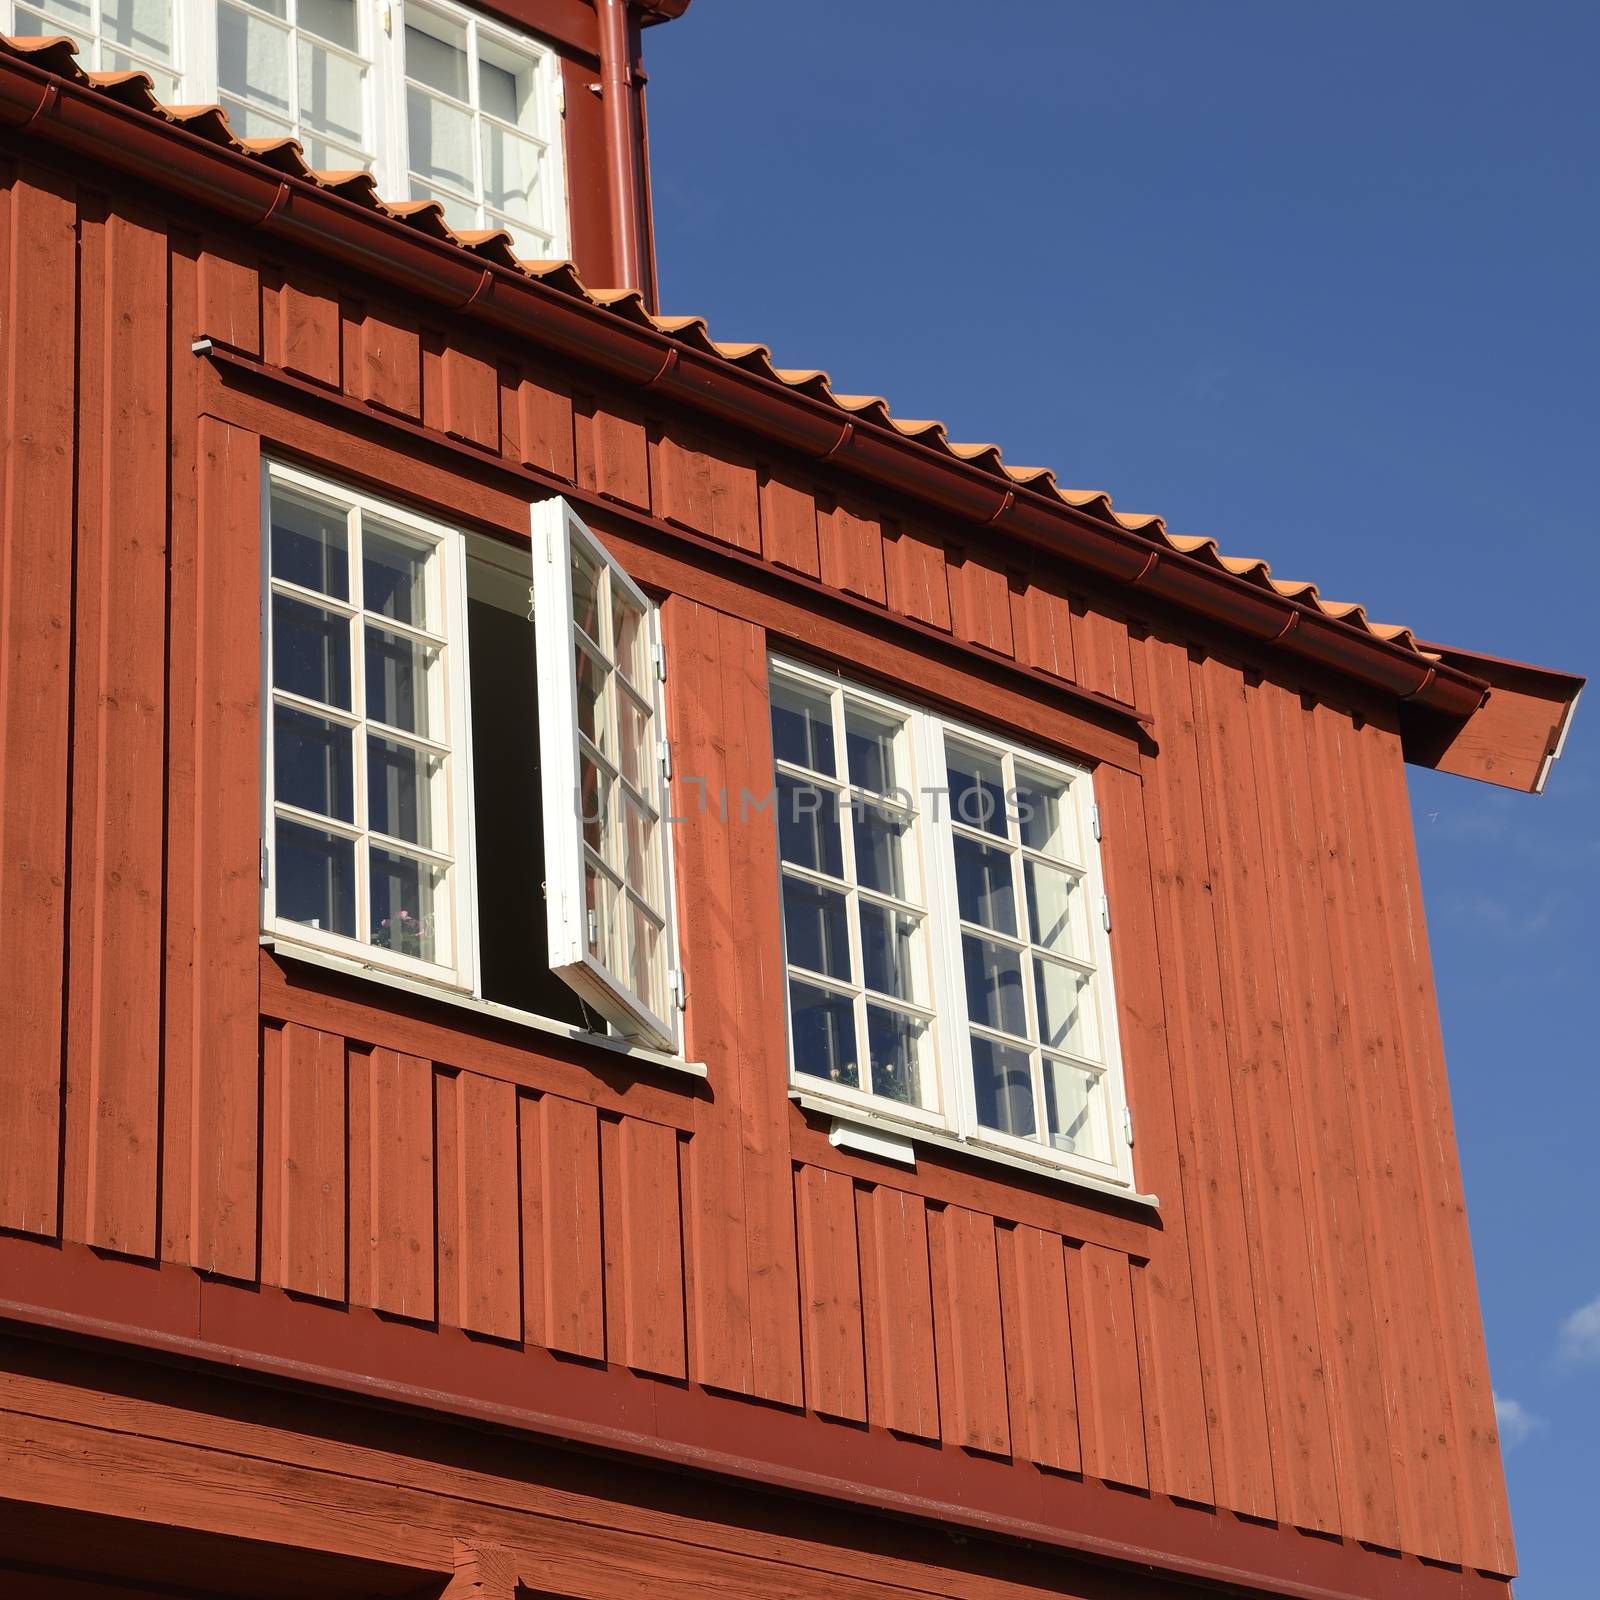 Traditional Swedish wooden facade.